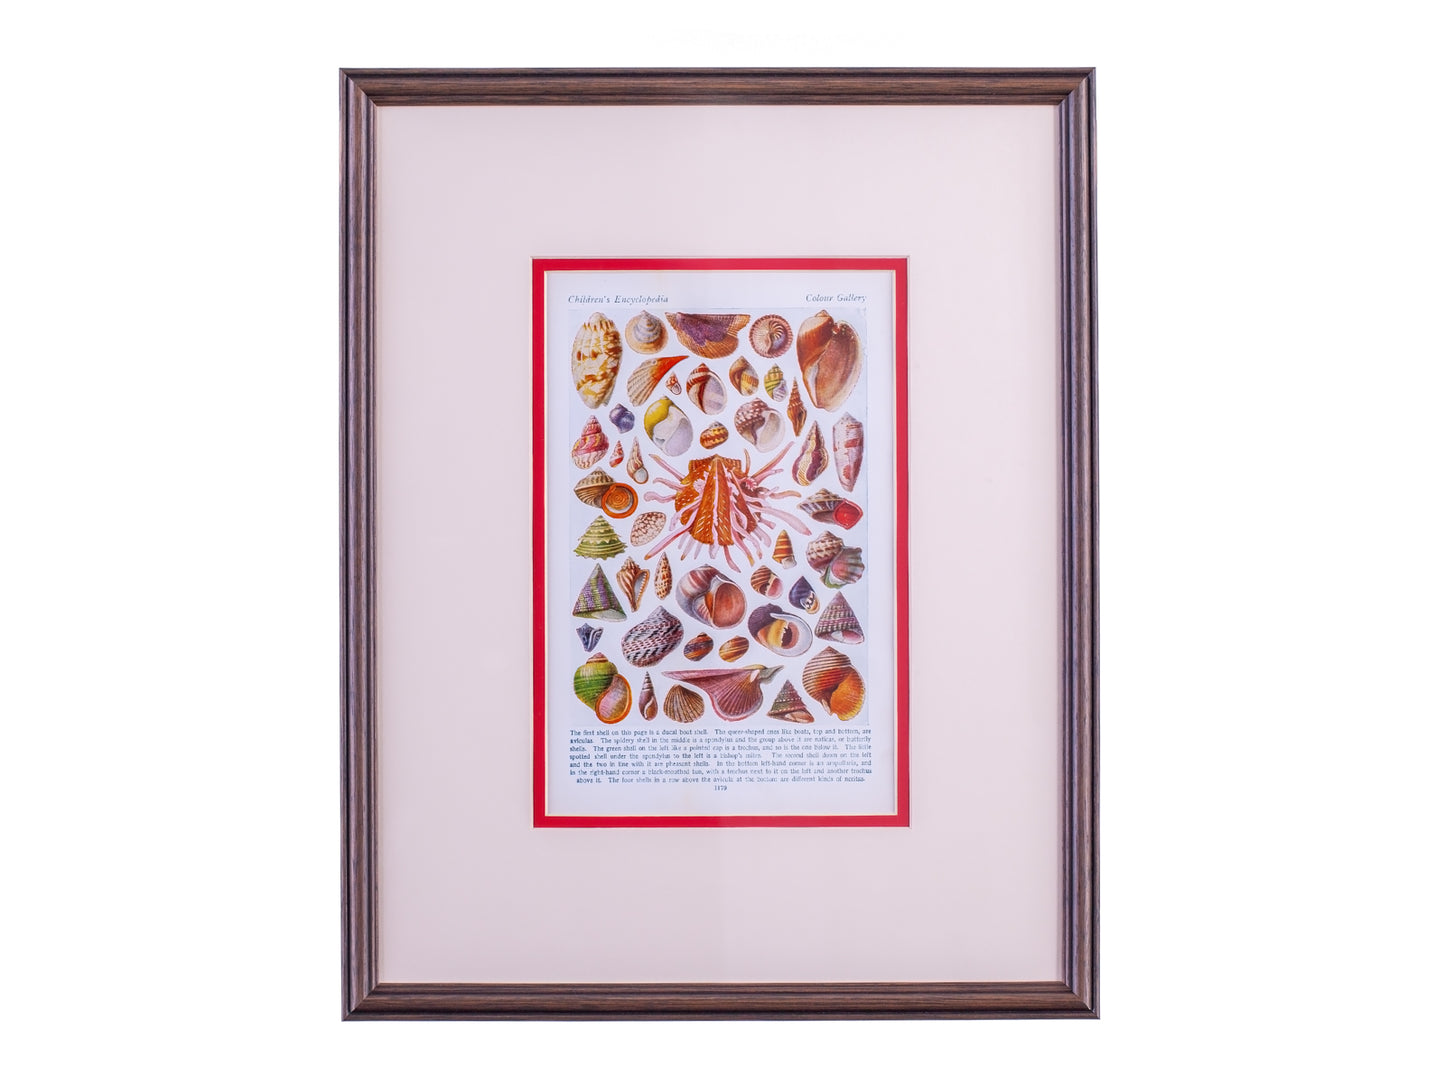 Vintage framed print perfect for a pink aesthetic